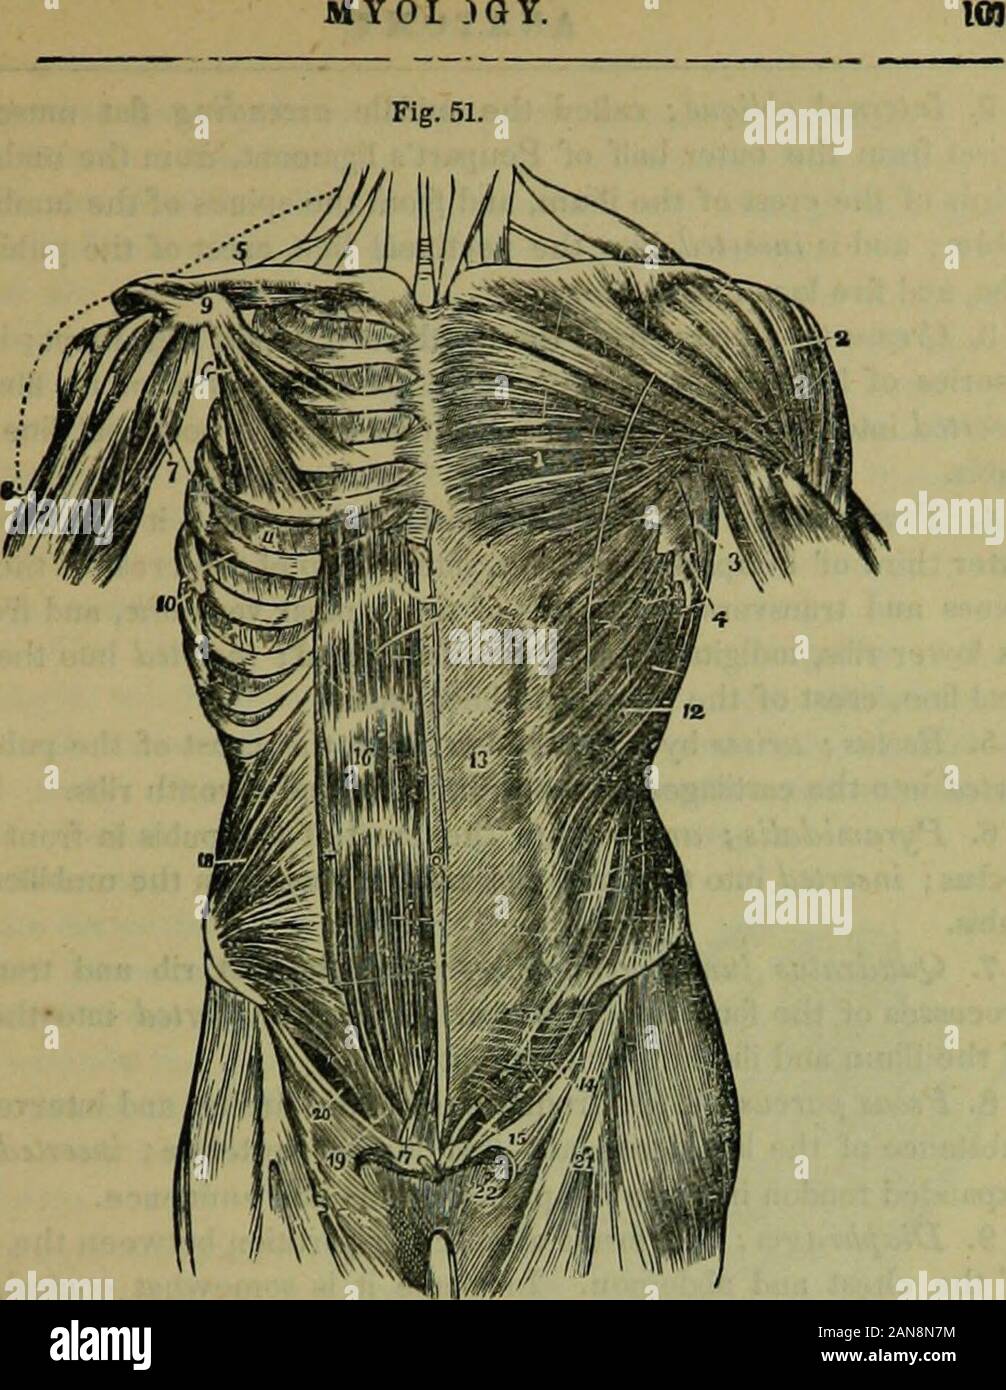 The hydropathic encyclopedia: a system of hydropathy and hygiene .. . ment. Gimbernats ligament is that part of the aponeu-rosis inserted into the pectineal line. The linea alba is a white tendi-nous slip extending along the middle of the abdomen from the ensiformcartilage to the os pubis. Externally, on each side of it, are twocurved lines, extending from the sides of the chest to the pubis, calledthe Untie semilunares; these lines are connected with the linea albaby several cross lines, usually three or four in number, called lineatransversa. Just above the crest of the pubis is a triangular Stock Photo